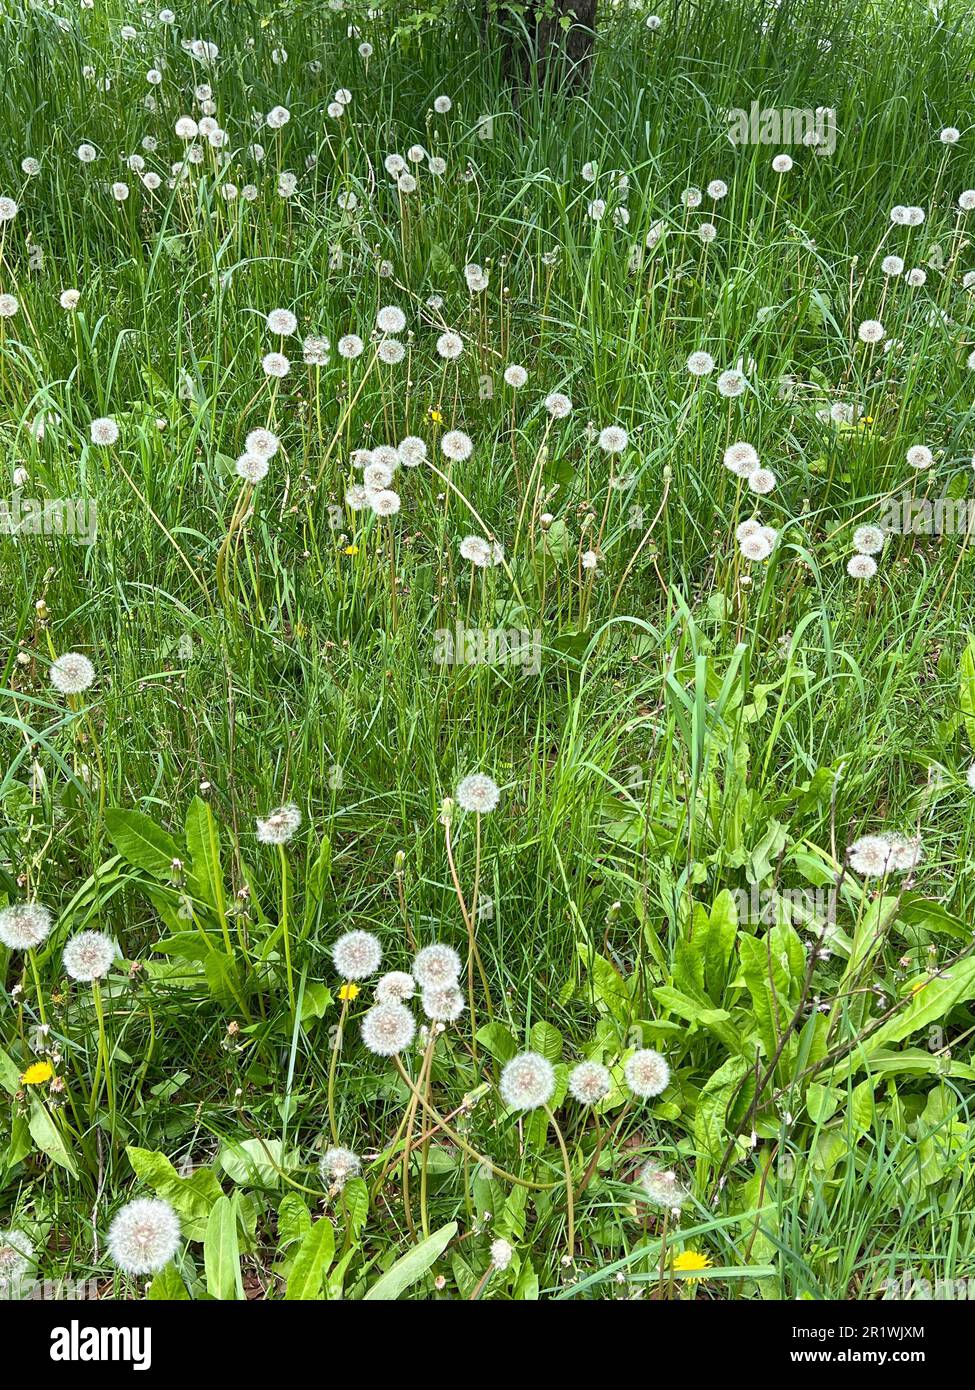 Field full of wishes. Dendelions gone to seed. Ready to blow and make wishes. Stock Photo